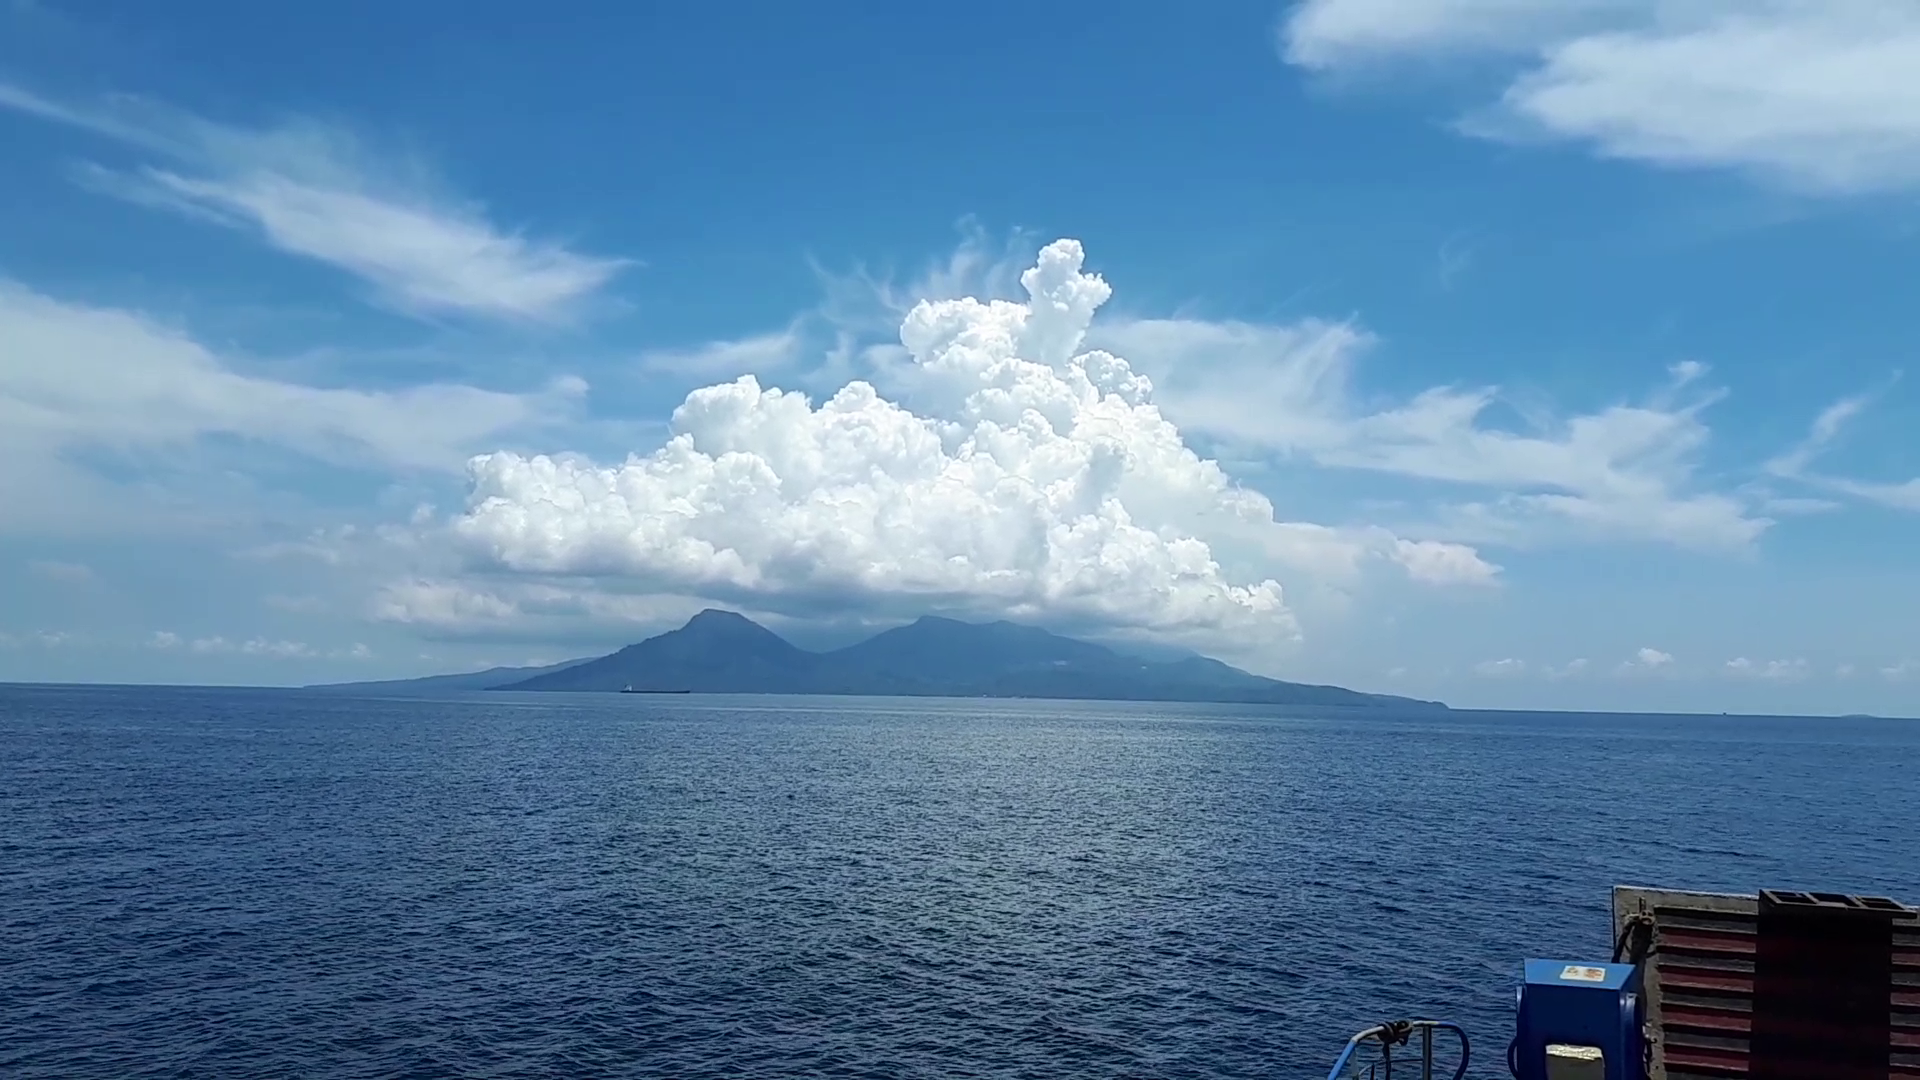 View approaching Camiguin